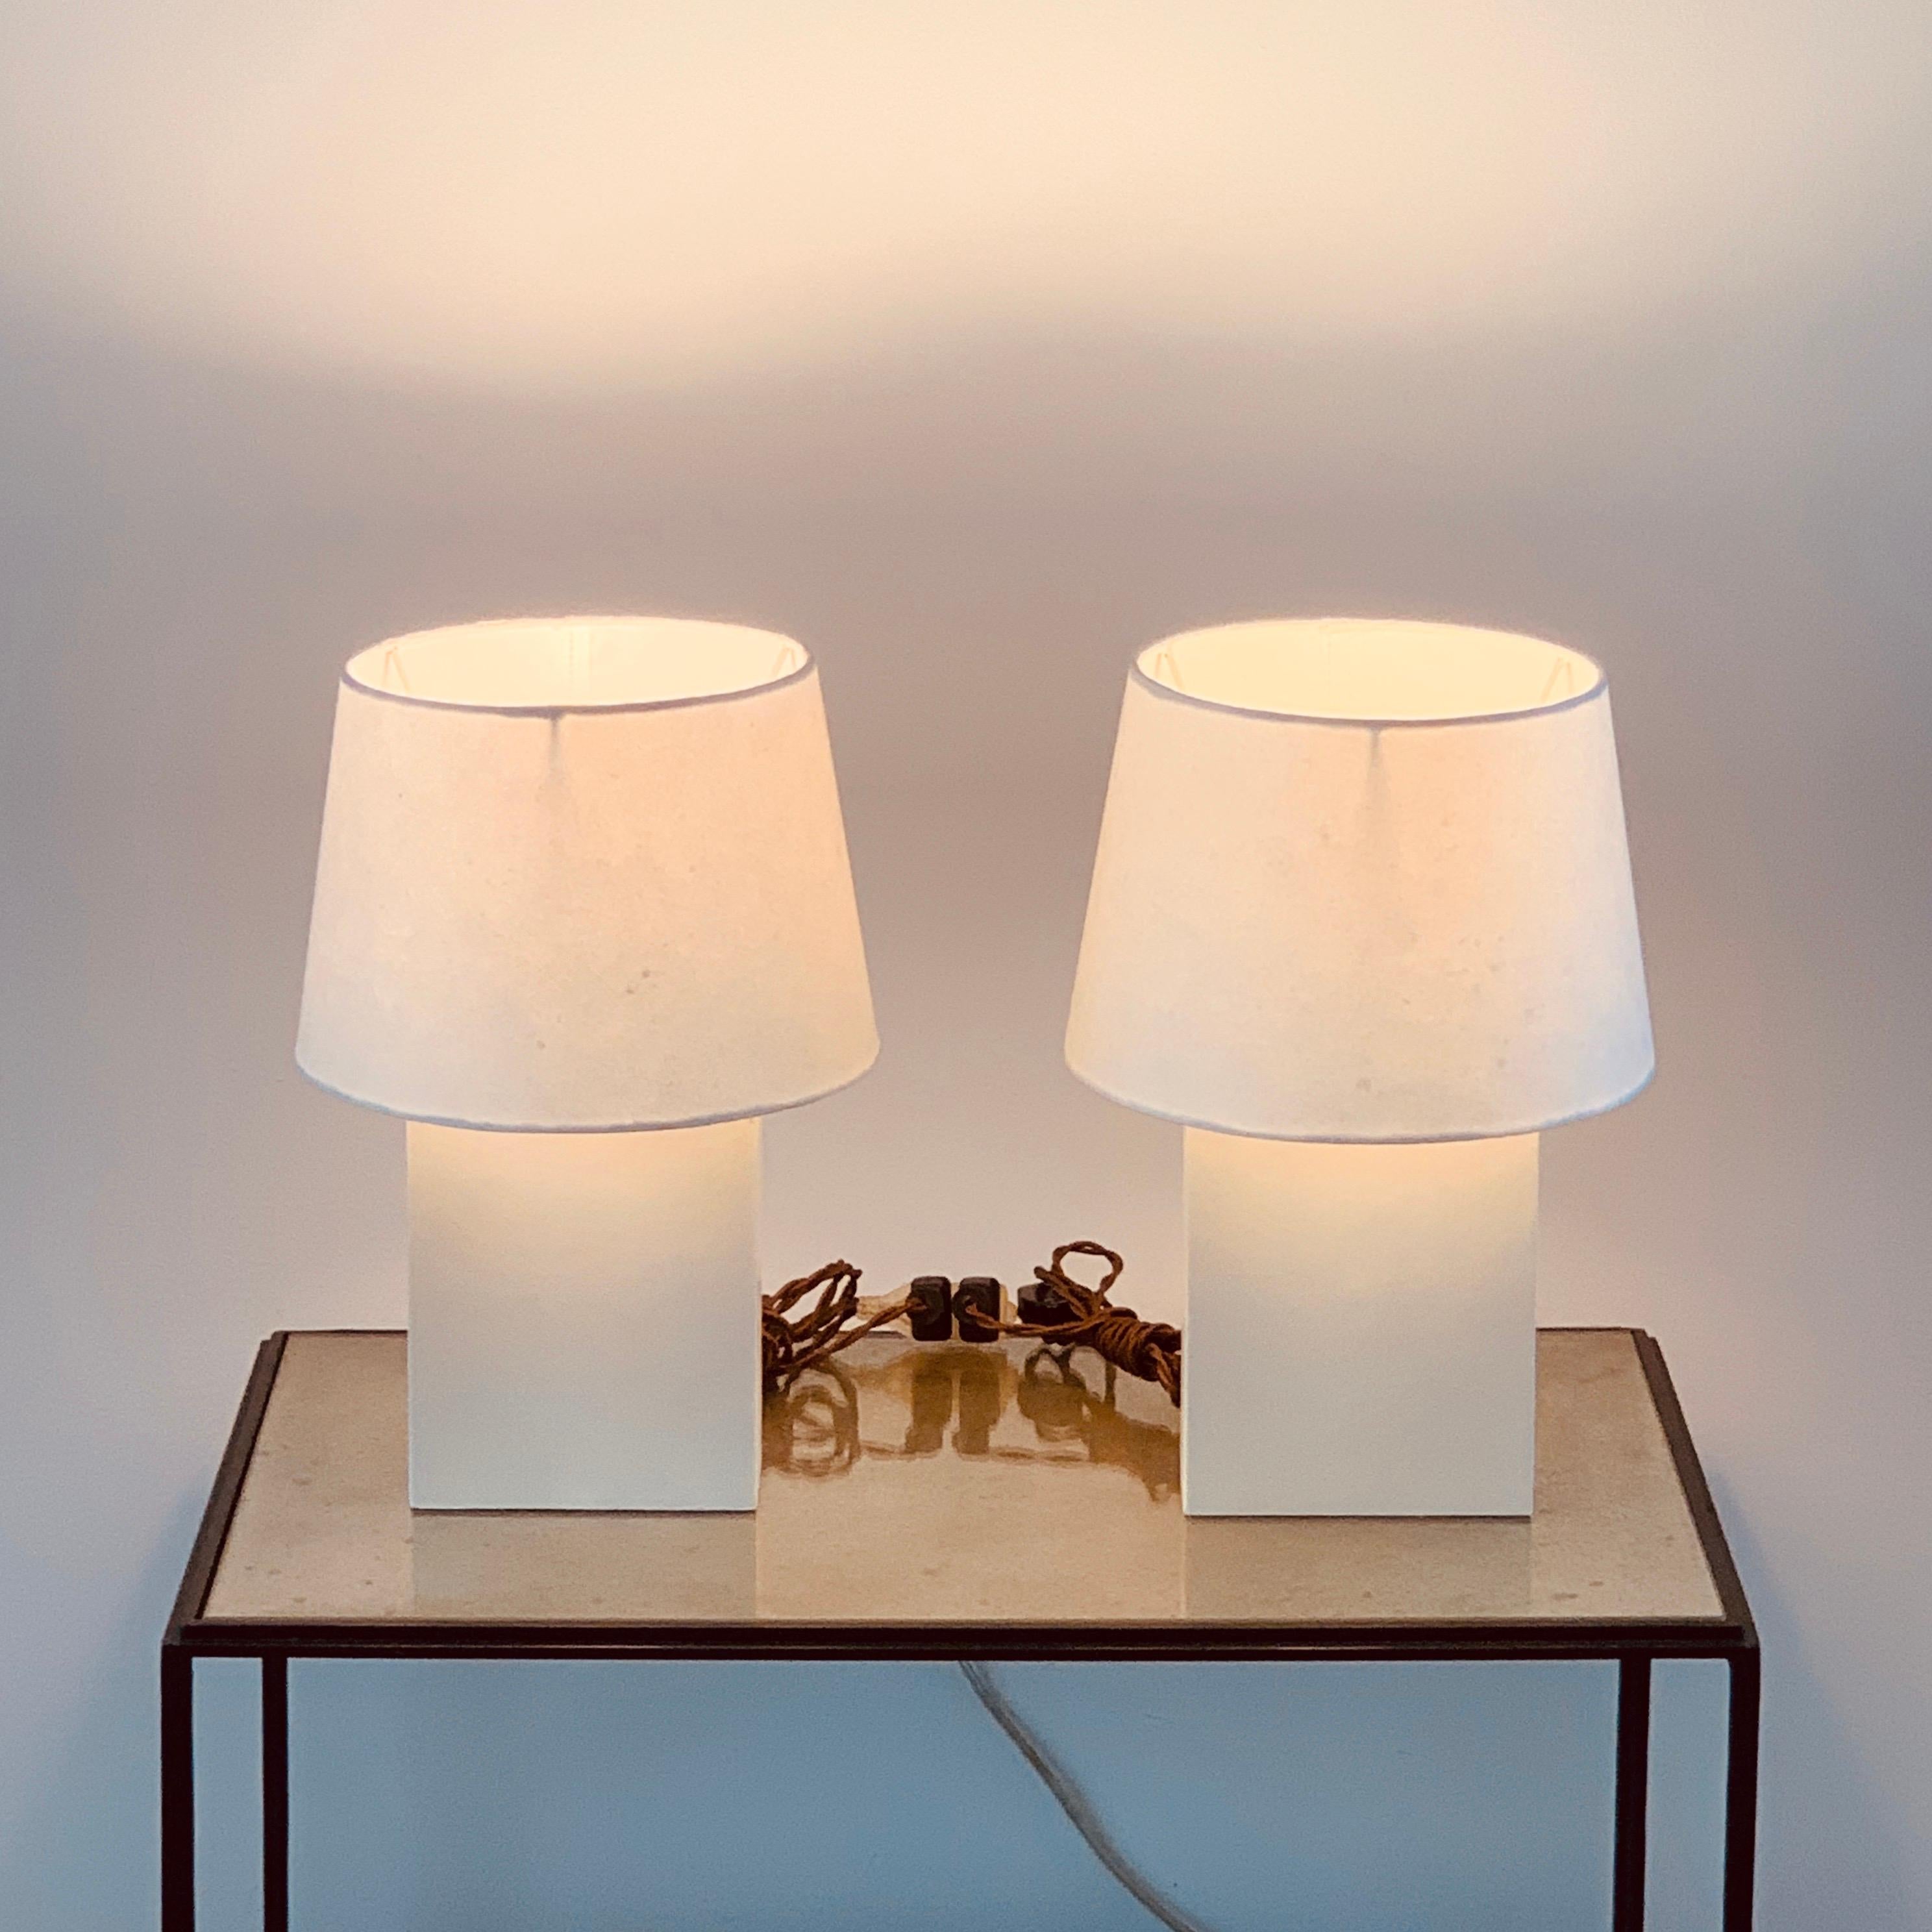 Pair of 'Bloc' parchment lamps with parchment paper shades by Design Frères.

The overall dimensions are 10 in. diameter x 15 in. tall.

The shade dimensions are 8 in. top diameter x 10 in. bottom diameter x 7 in. tall.